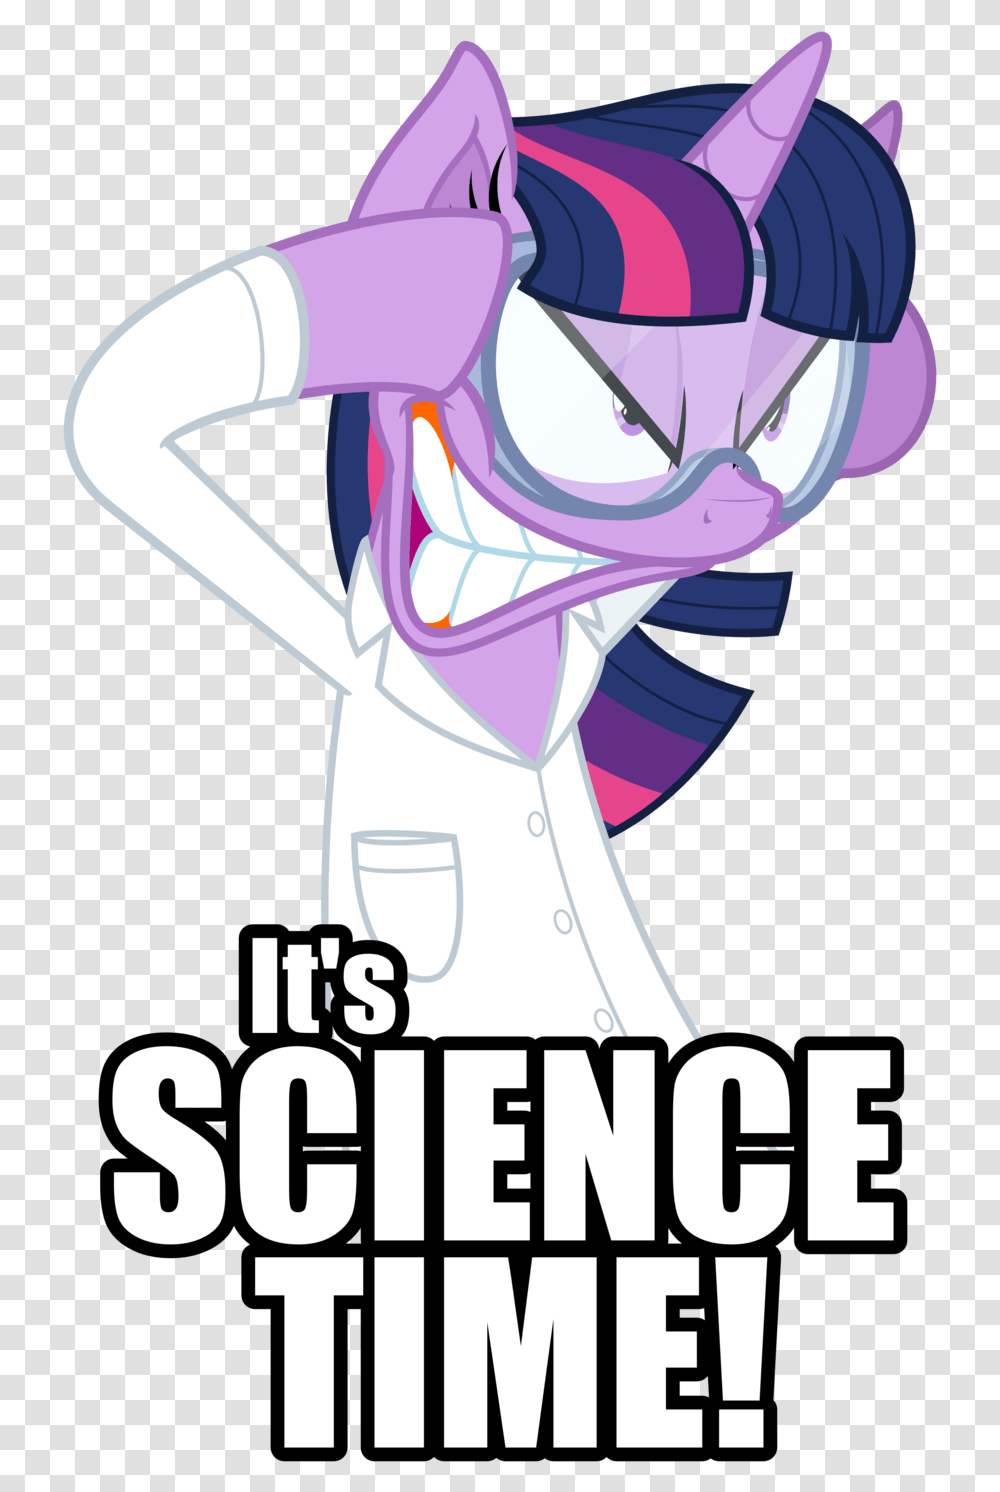 Science Image Hq My Little Pony Science, Graphics, Art, Drawing, Poster Transparent Png